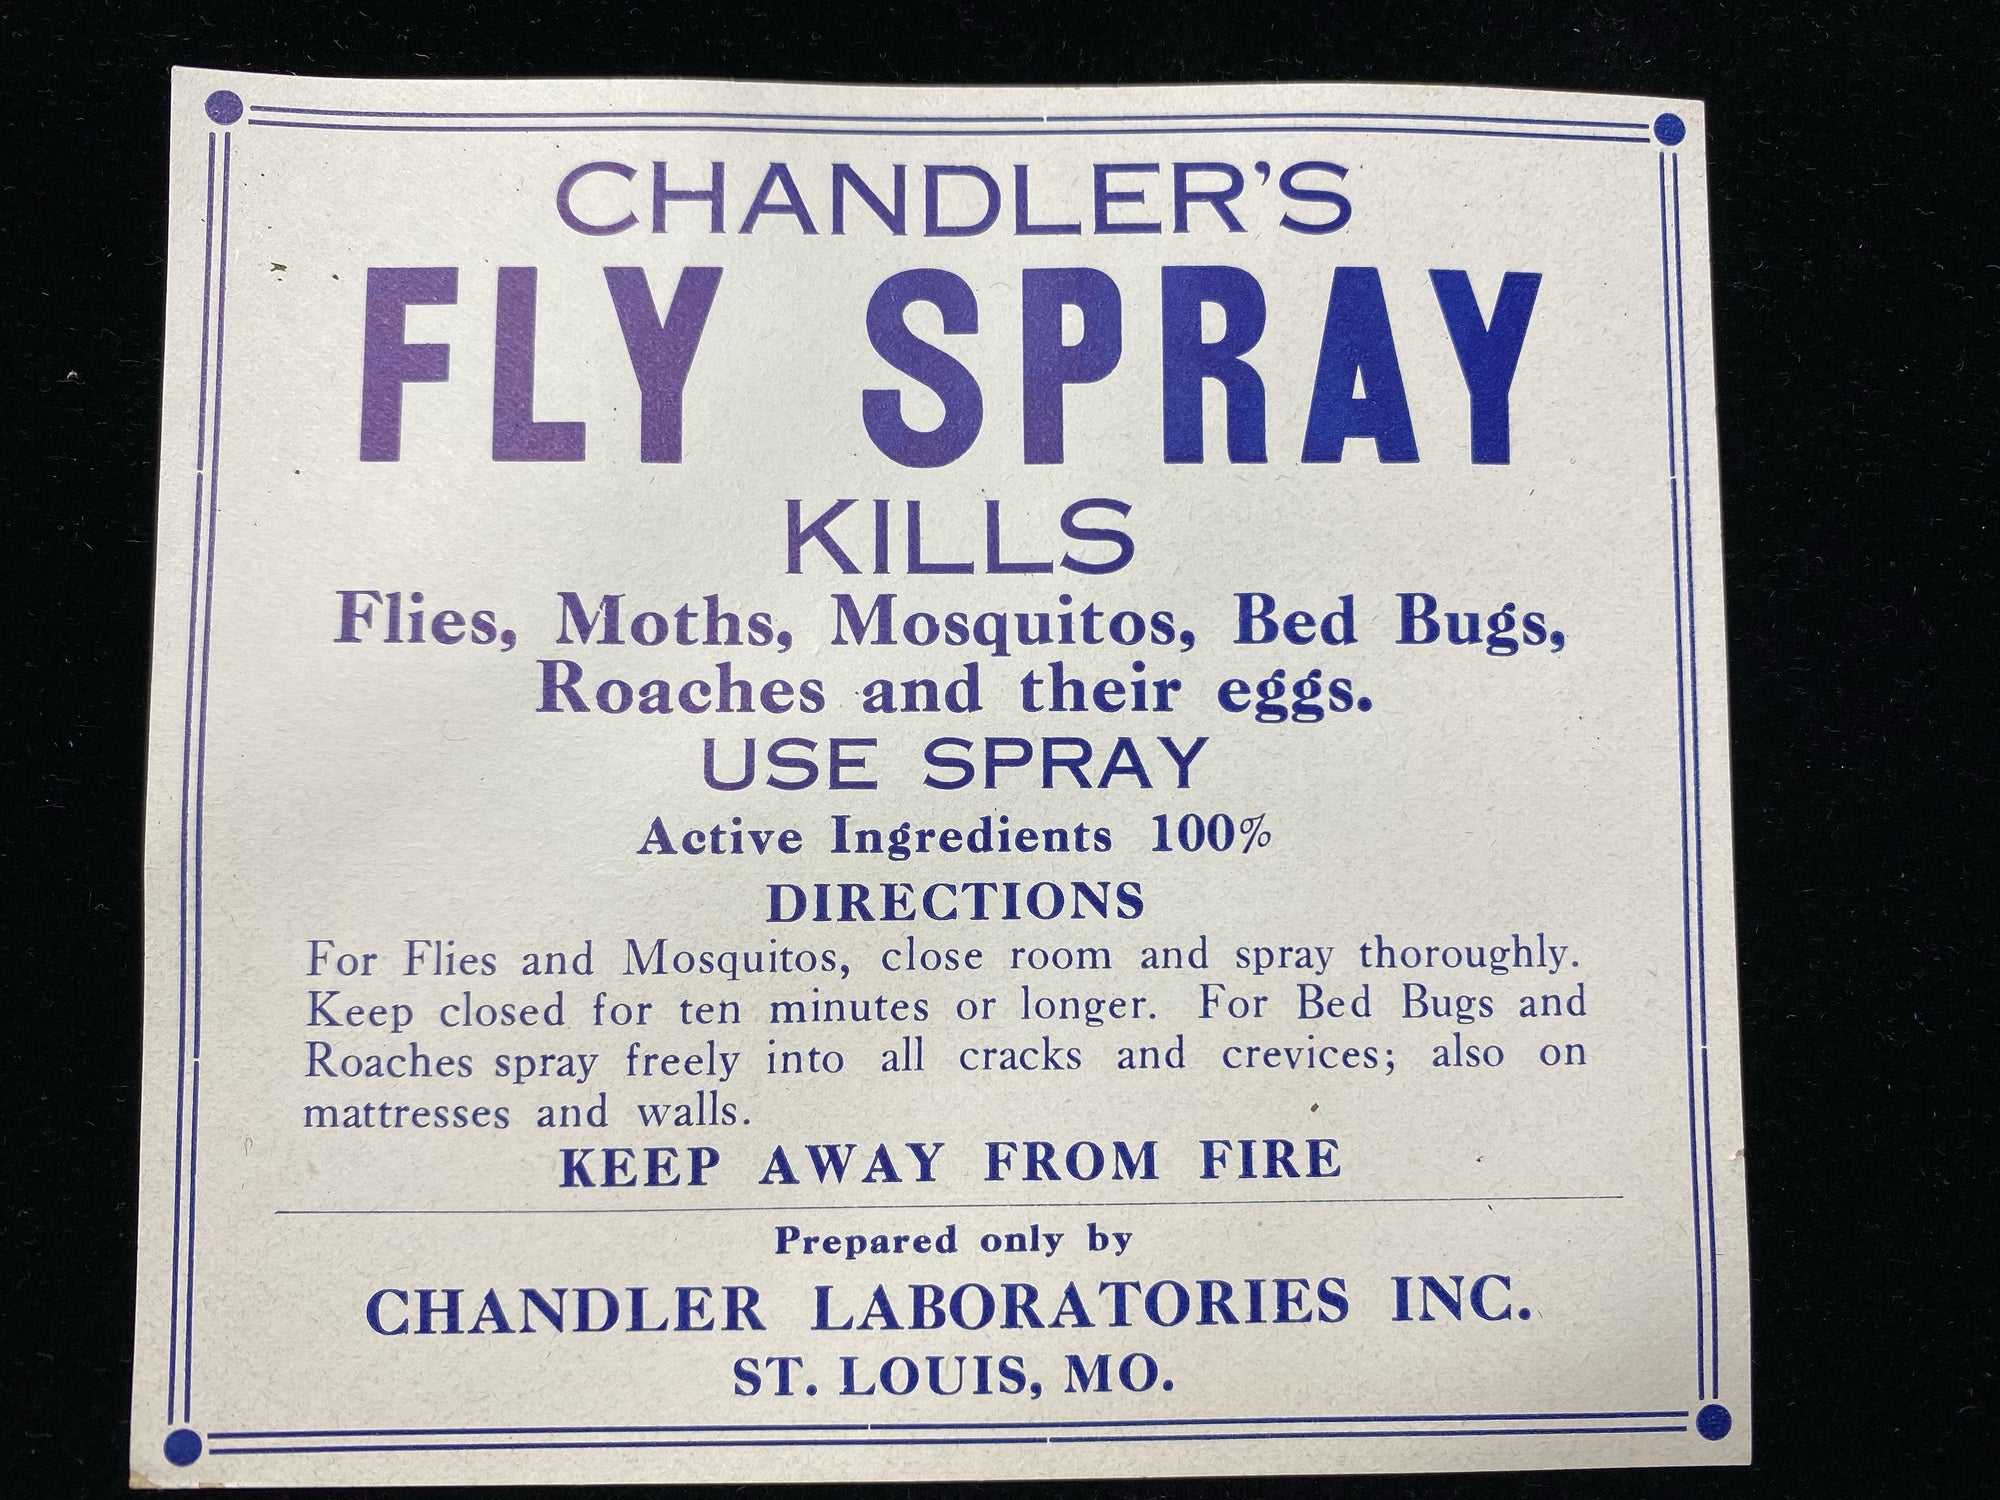 An original bottle label for Chandler's Fly Spray. In mint condition and never used, dating to 1910